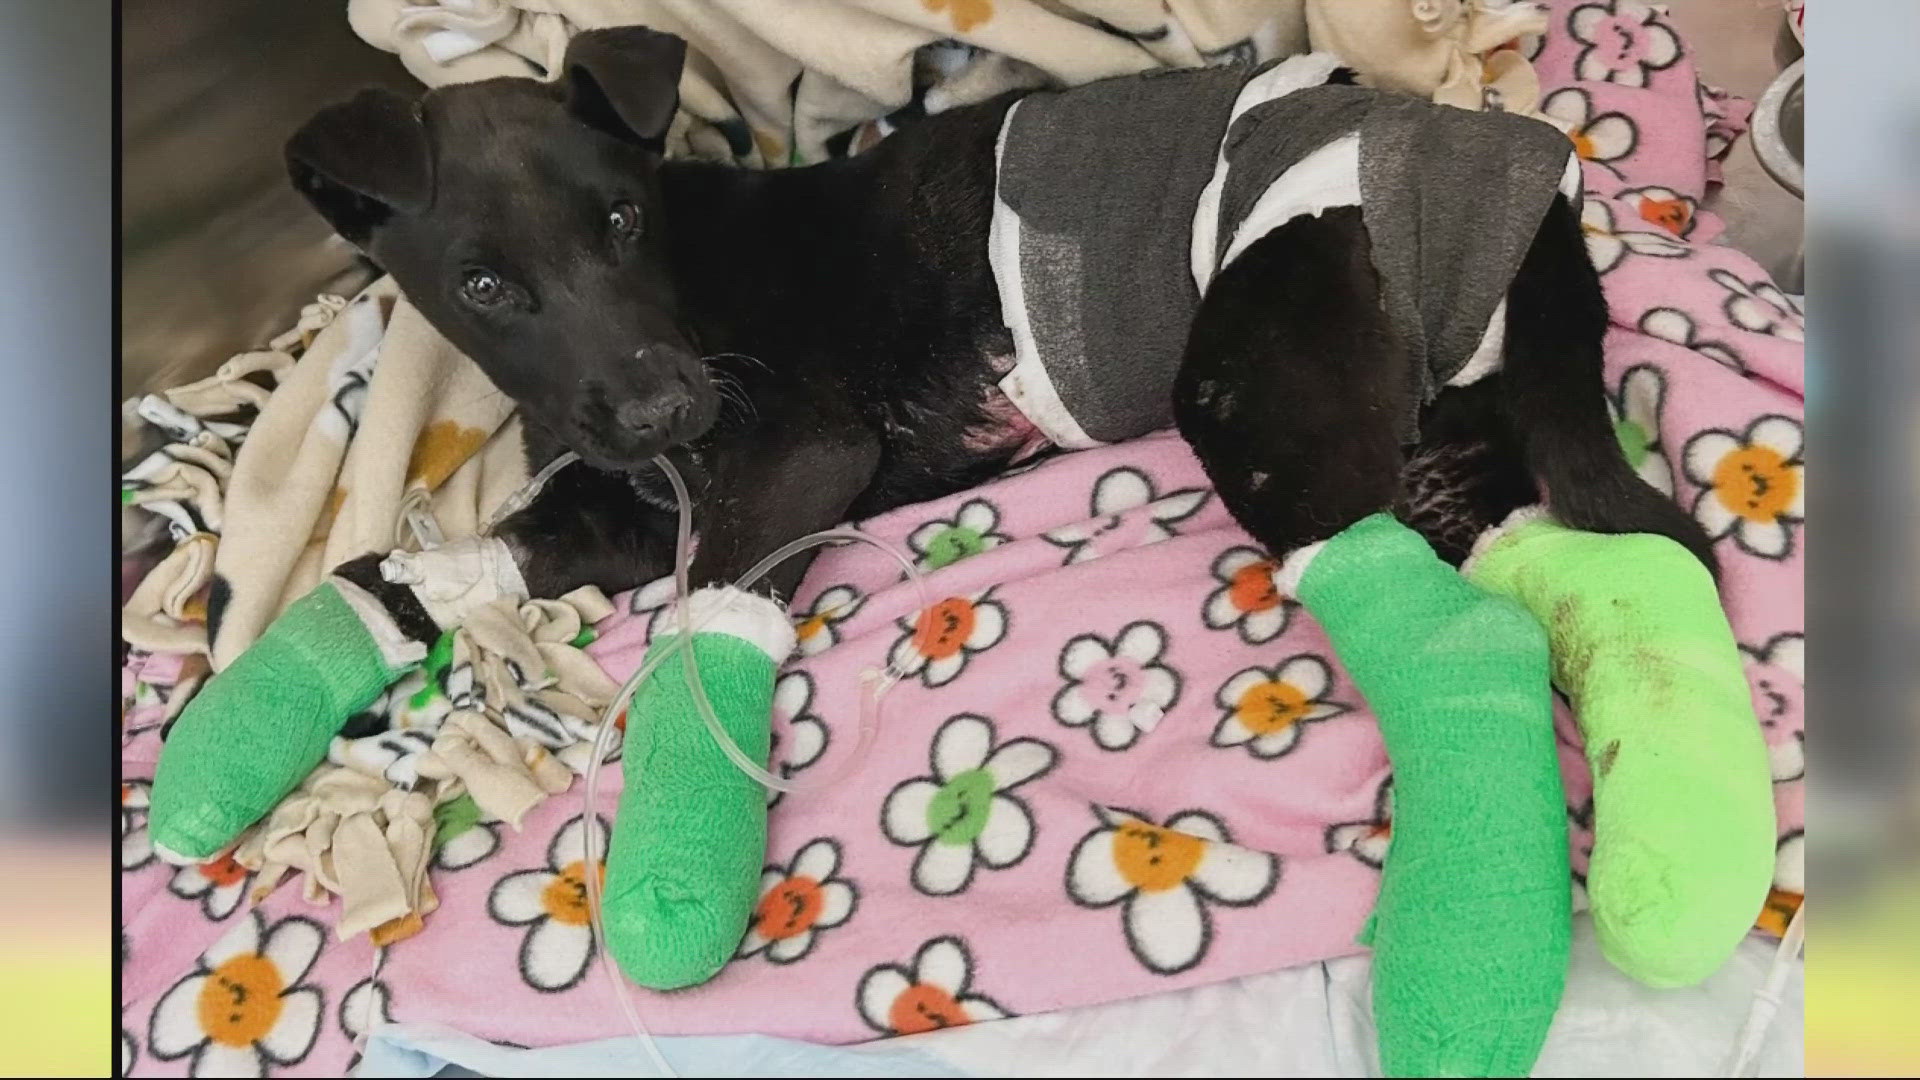 The puppy was found with fourth-degree burns on his legs and belly in an alley in Fresno, California. He is now in the care of a dog rescue in Oregon.